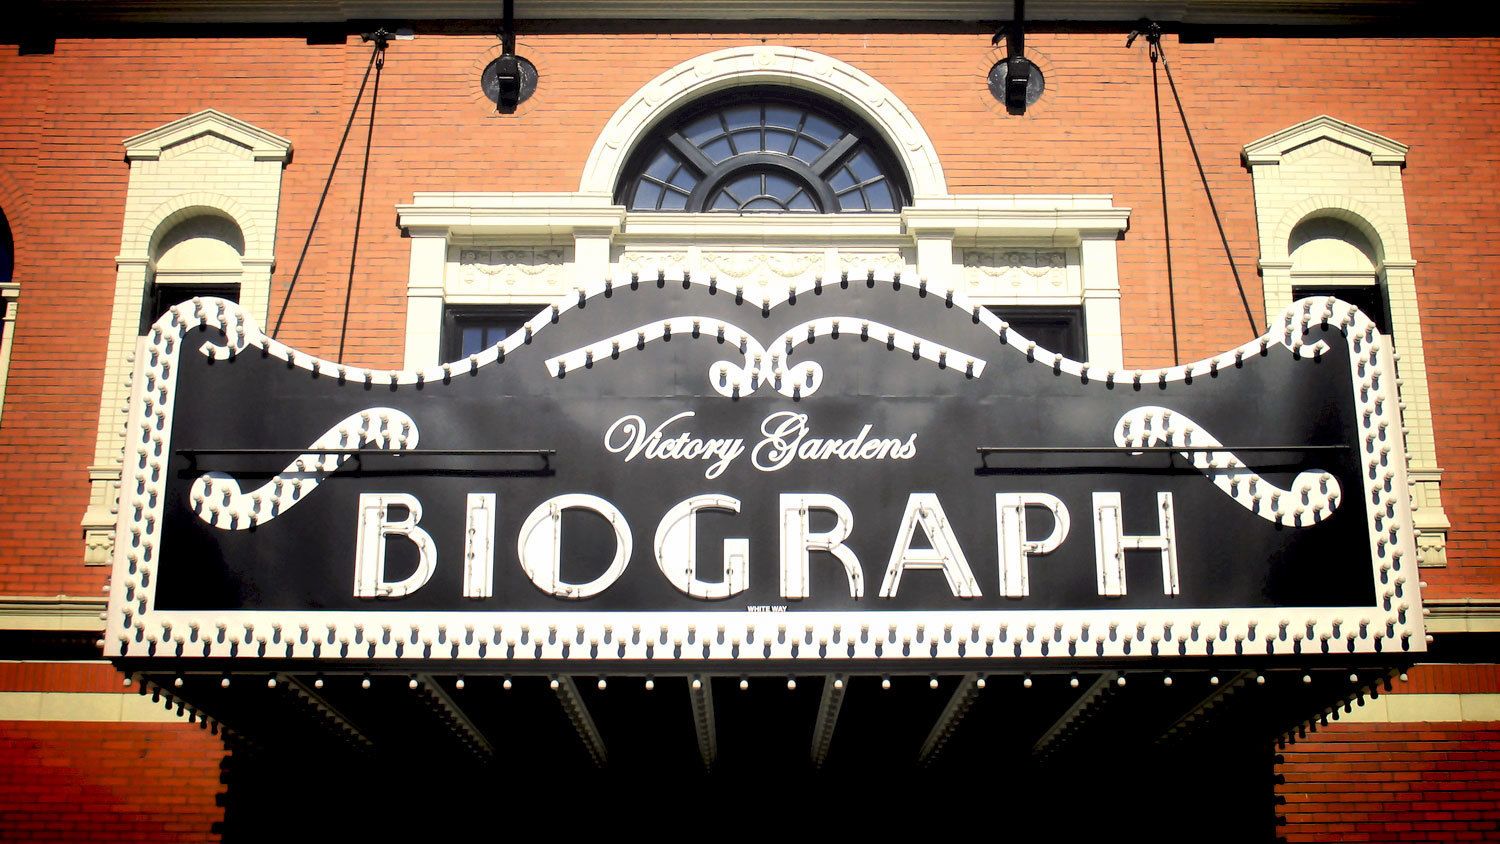 The Biograph Theater in Chicago